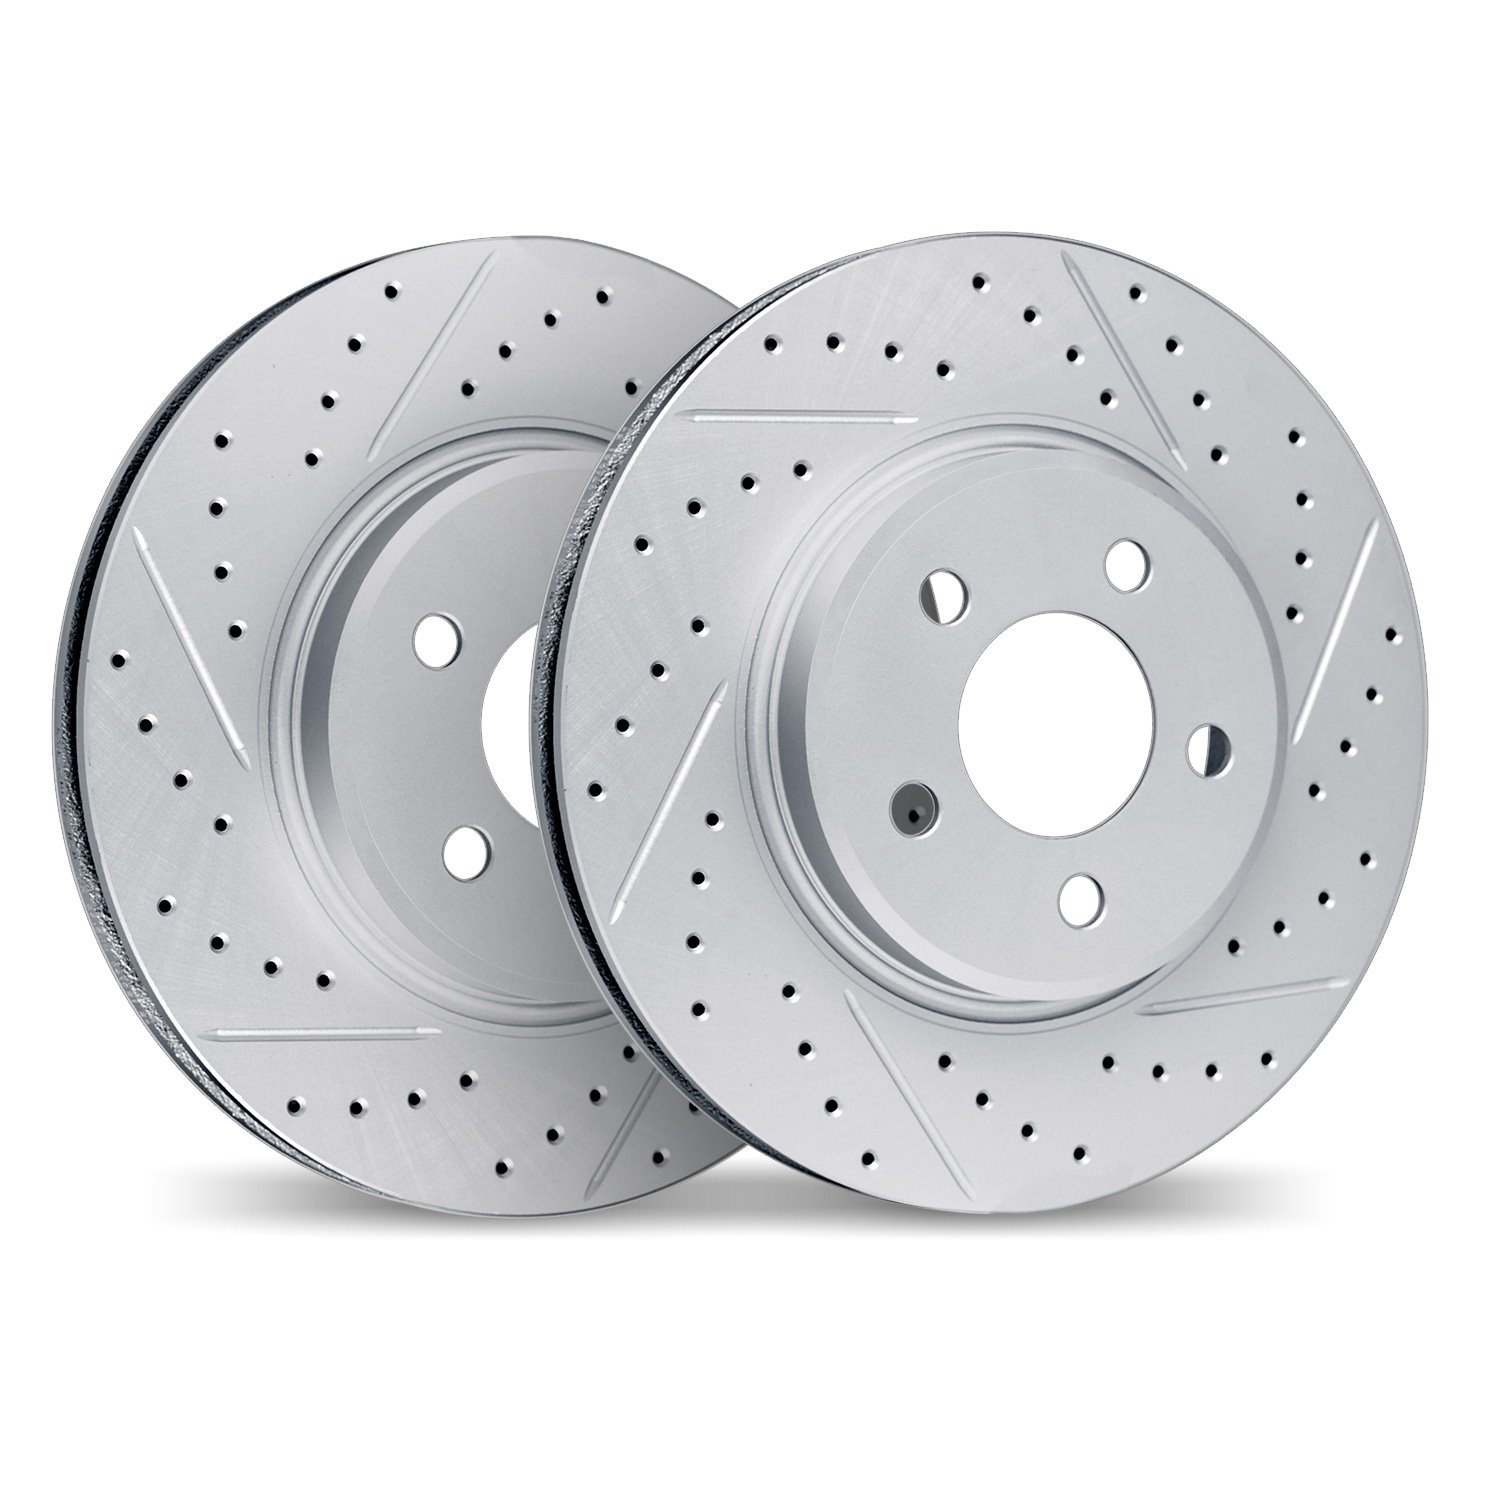 2002-45011 Geoperformance Drilled/Slotted Brake Rotors, 2001-2007 GM, Position: Front